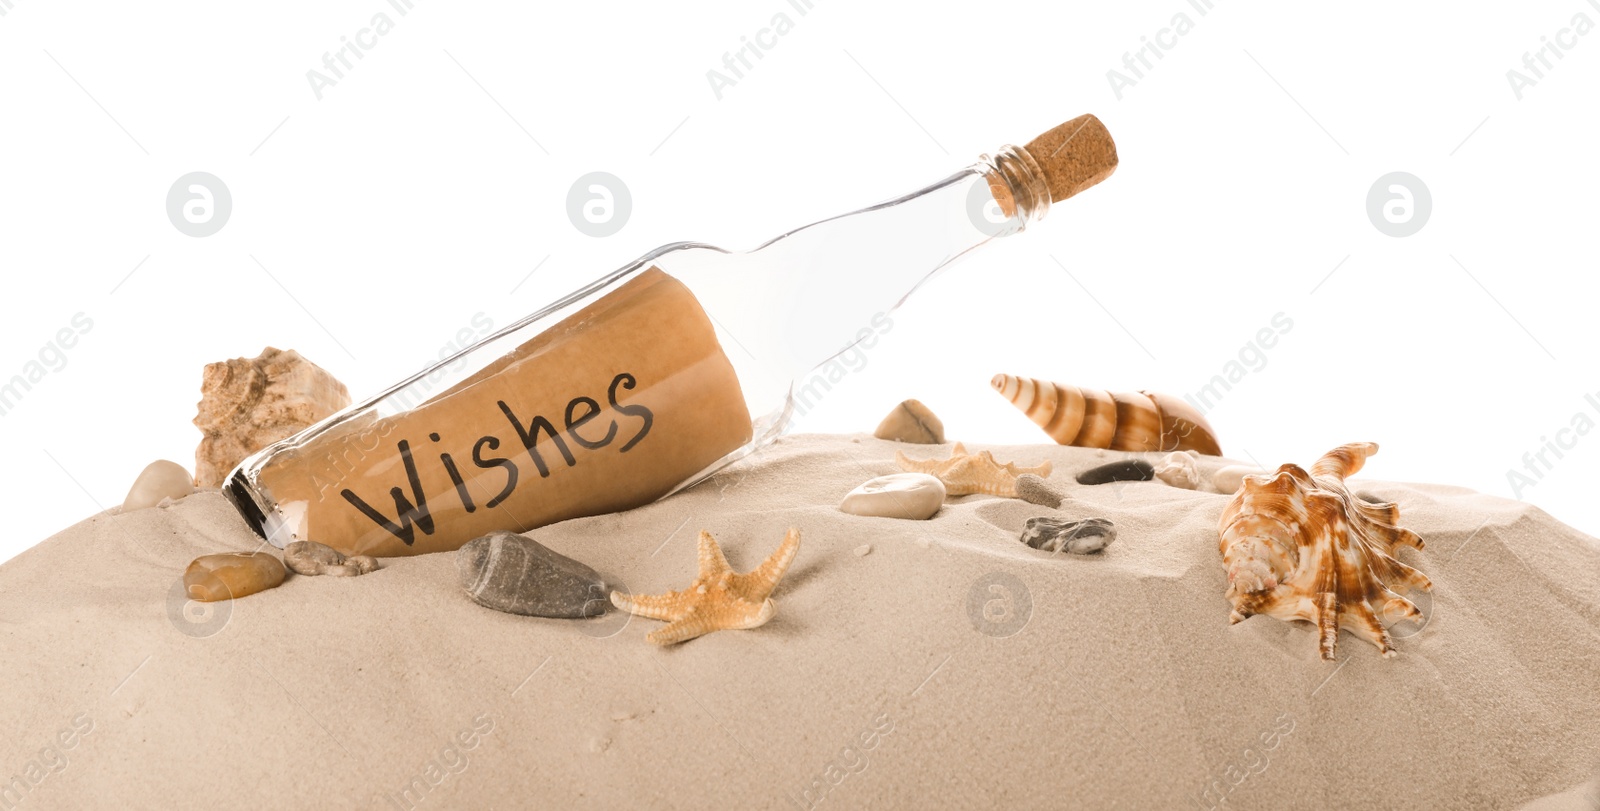 Photo of Corked glass bottle with Wishes note and seashells on sand against white background